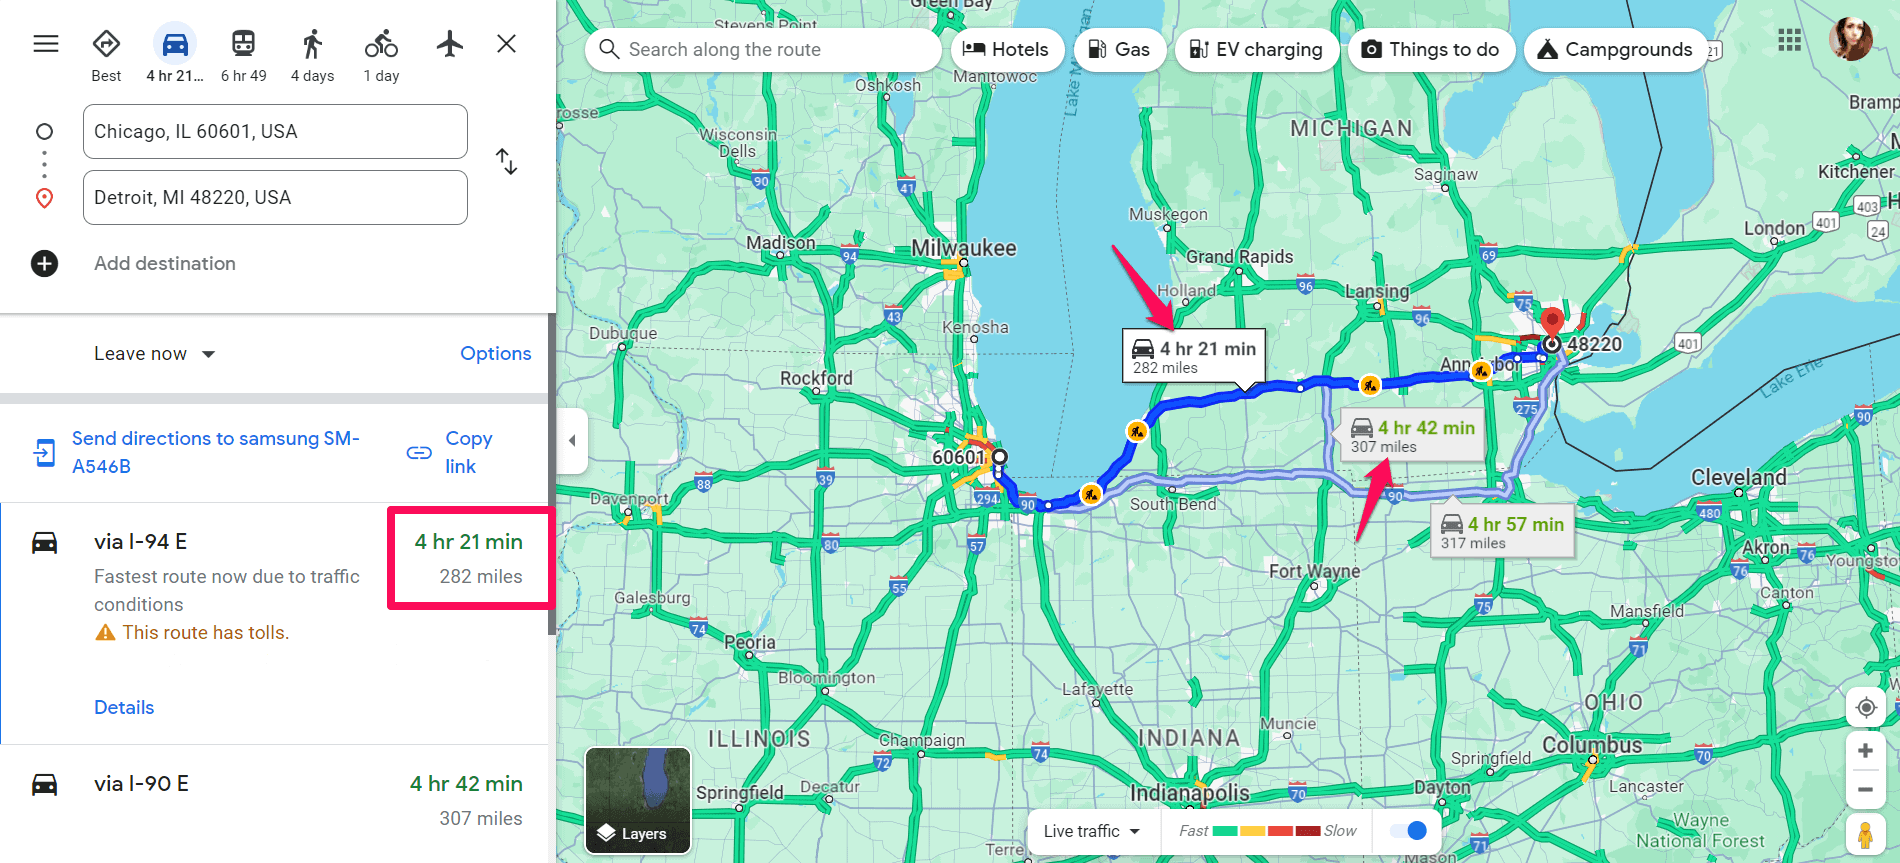 Exploring route distance and travel time in Google Maps